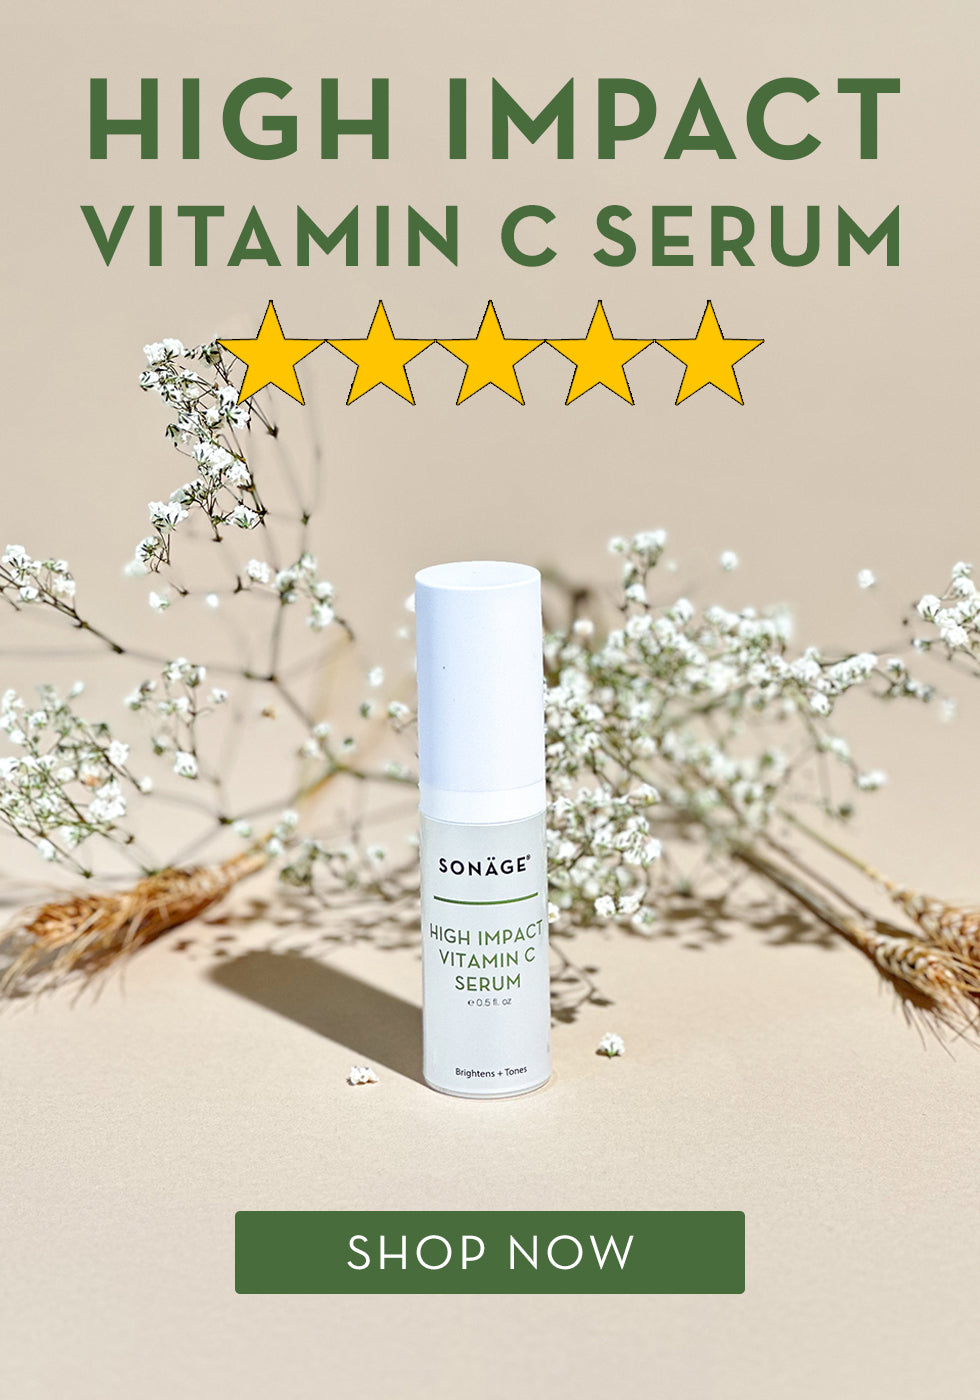 What Does Vitamin C Serum Do & How Is It Used?